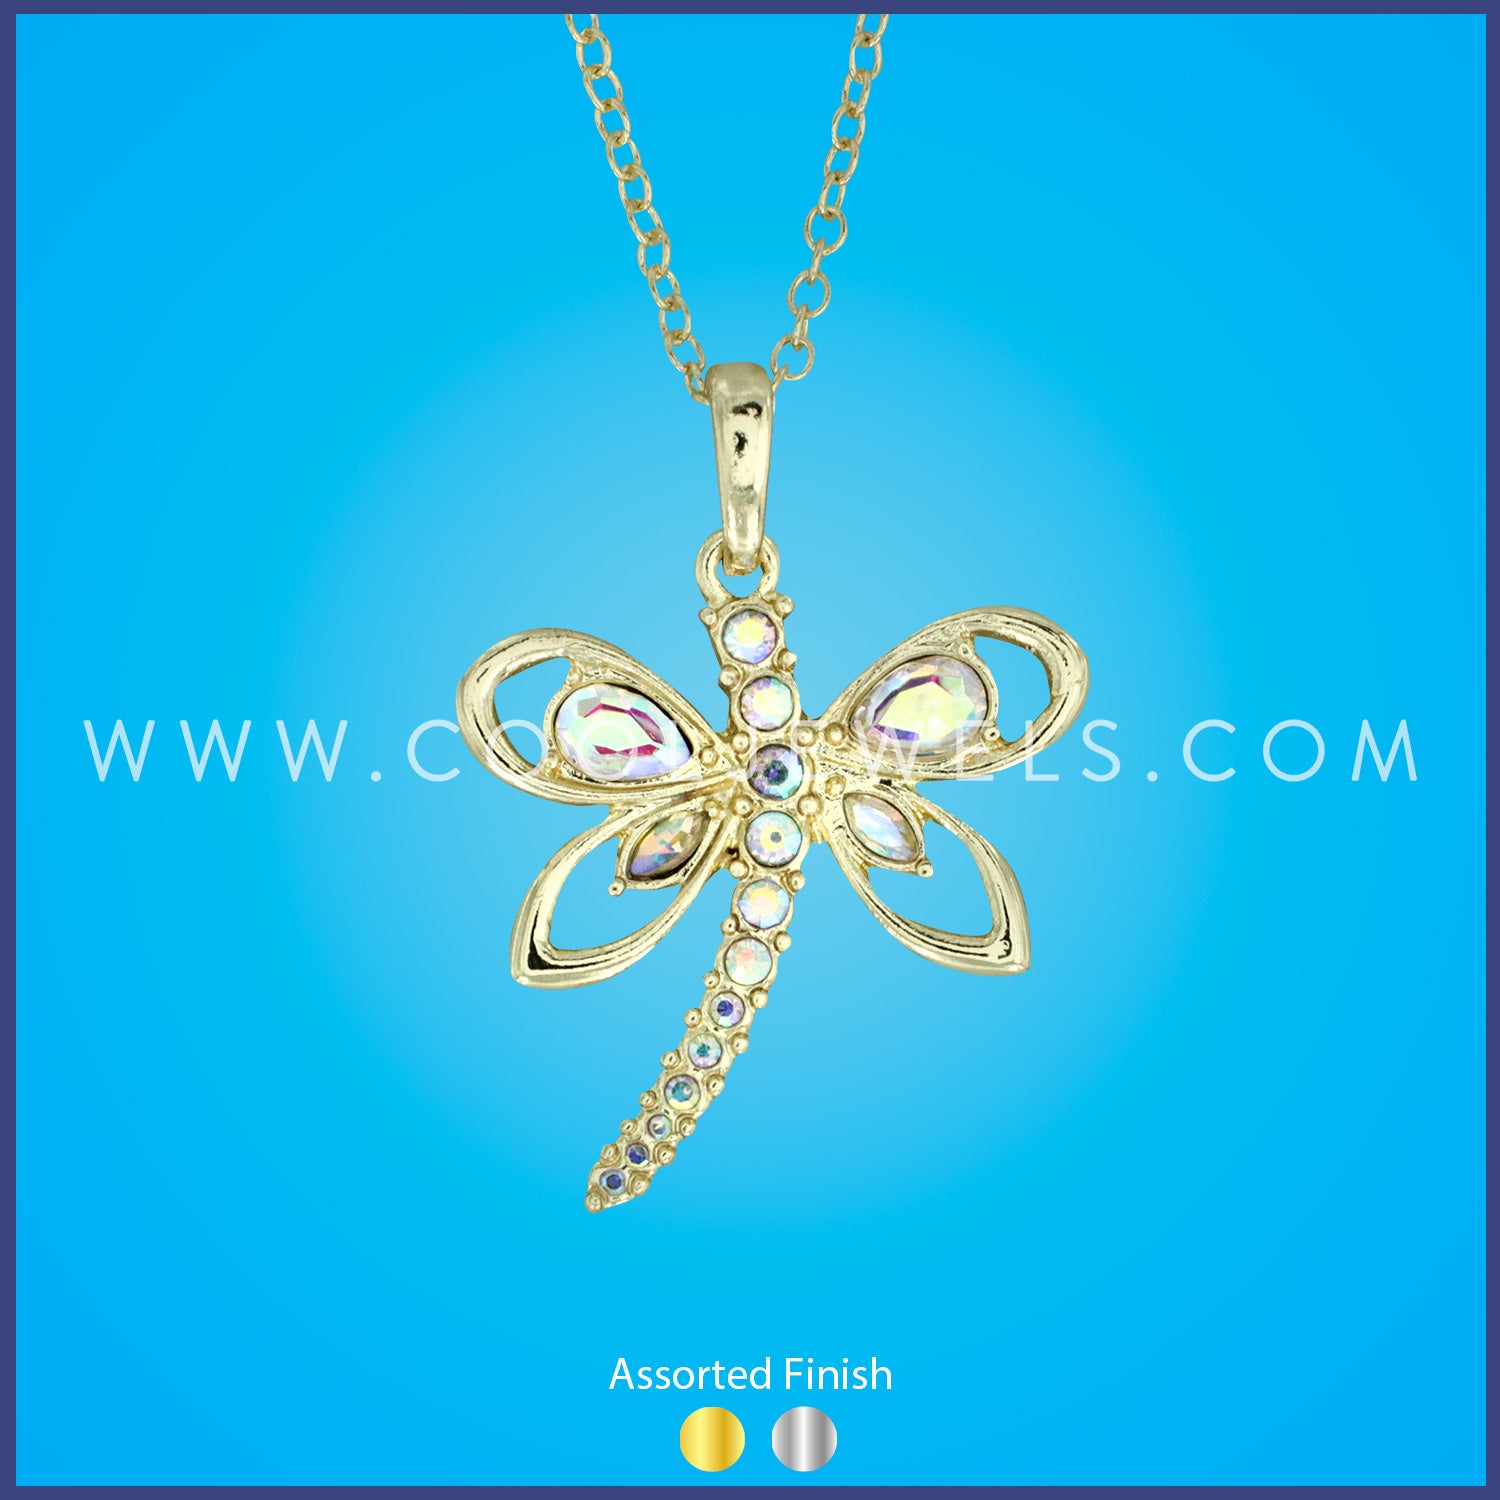 LINK CHAIN NECKLACE WITH RHINESTONE DRAGONFLY PENDANT - ASSORTED FINISH